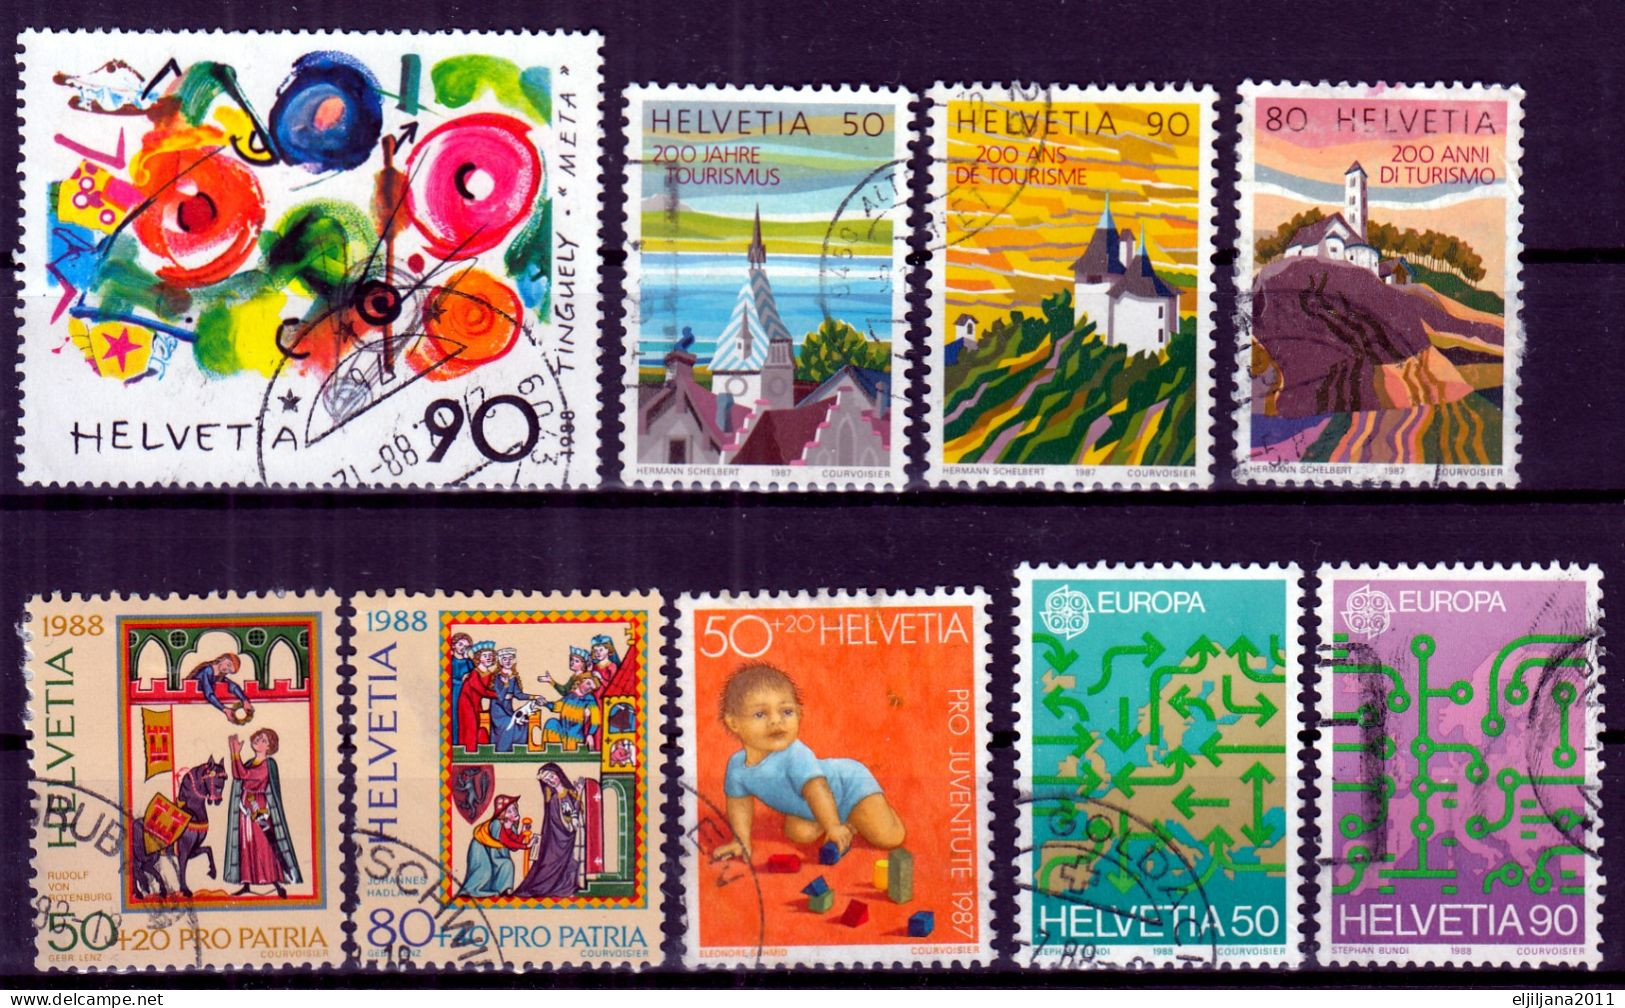 Switzerland / Helvetia / Schweiz / Suisse 1987 - 1988 ⁕ Nice Collection / Lot Of 16 Used Stamps - See All Scan - Usados